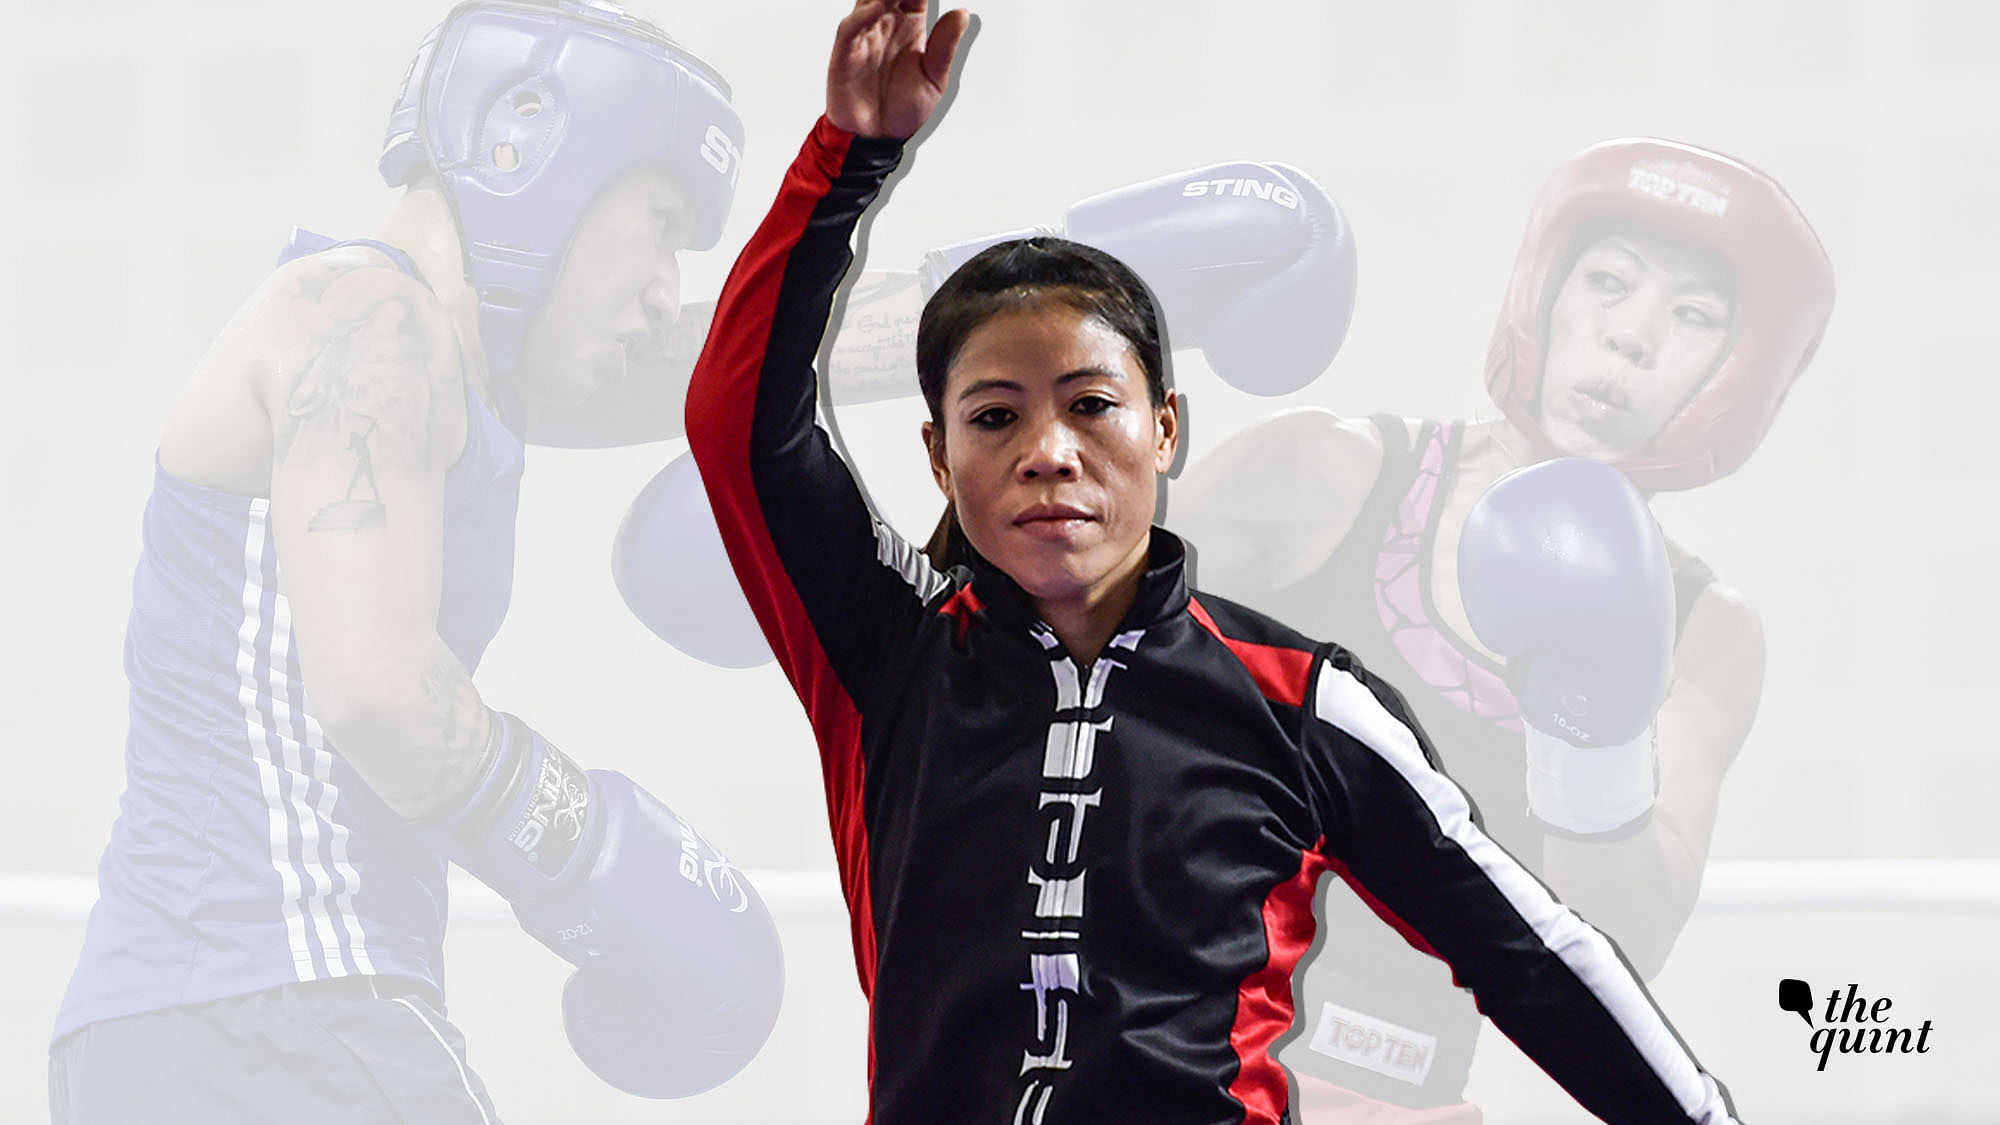 MC Mary Kom is set to fight for her sixth title at the Women’s World Boxing Championships.